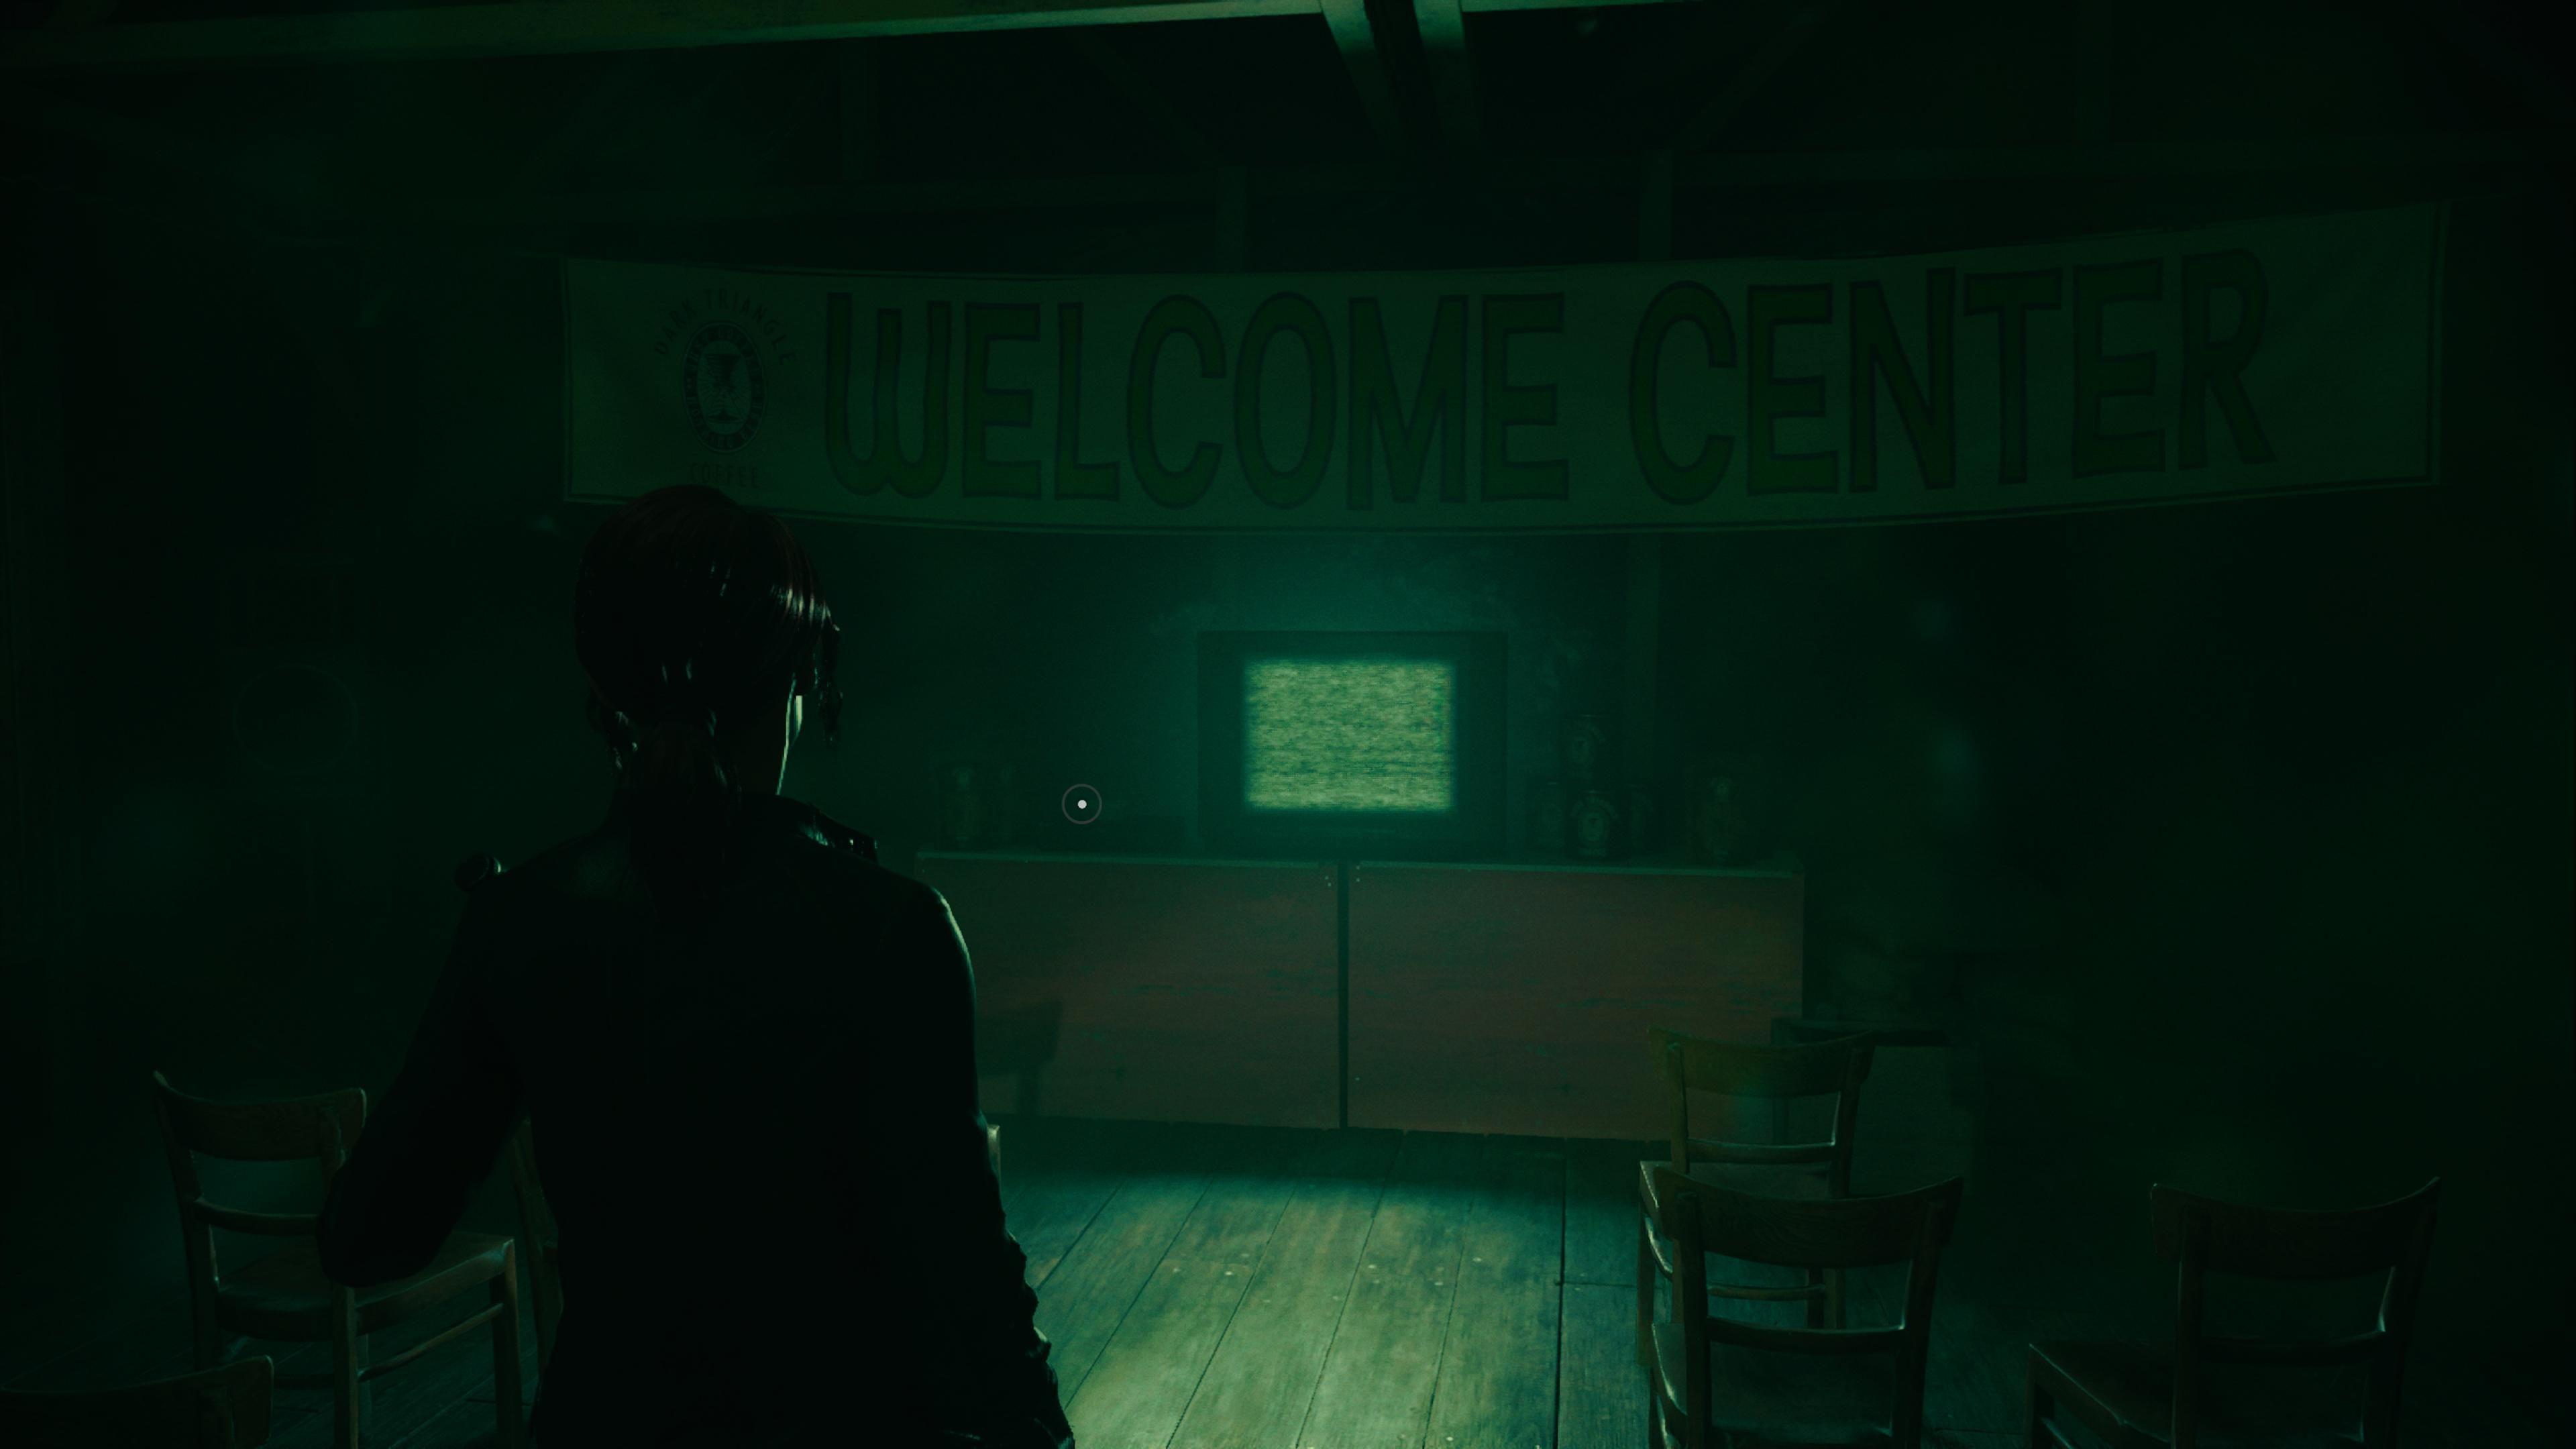 alan wake 2 night springs episode 2 vcr location in welcome center